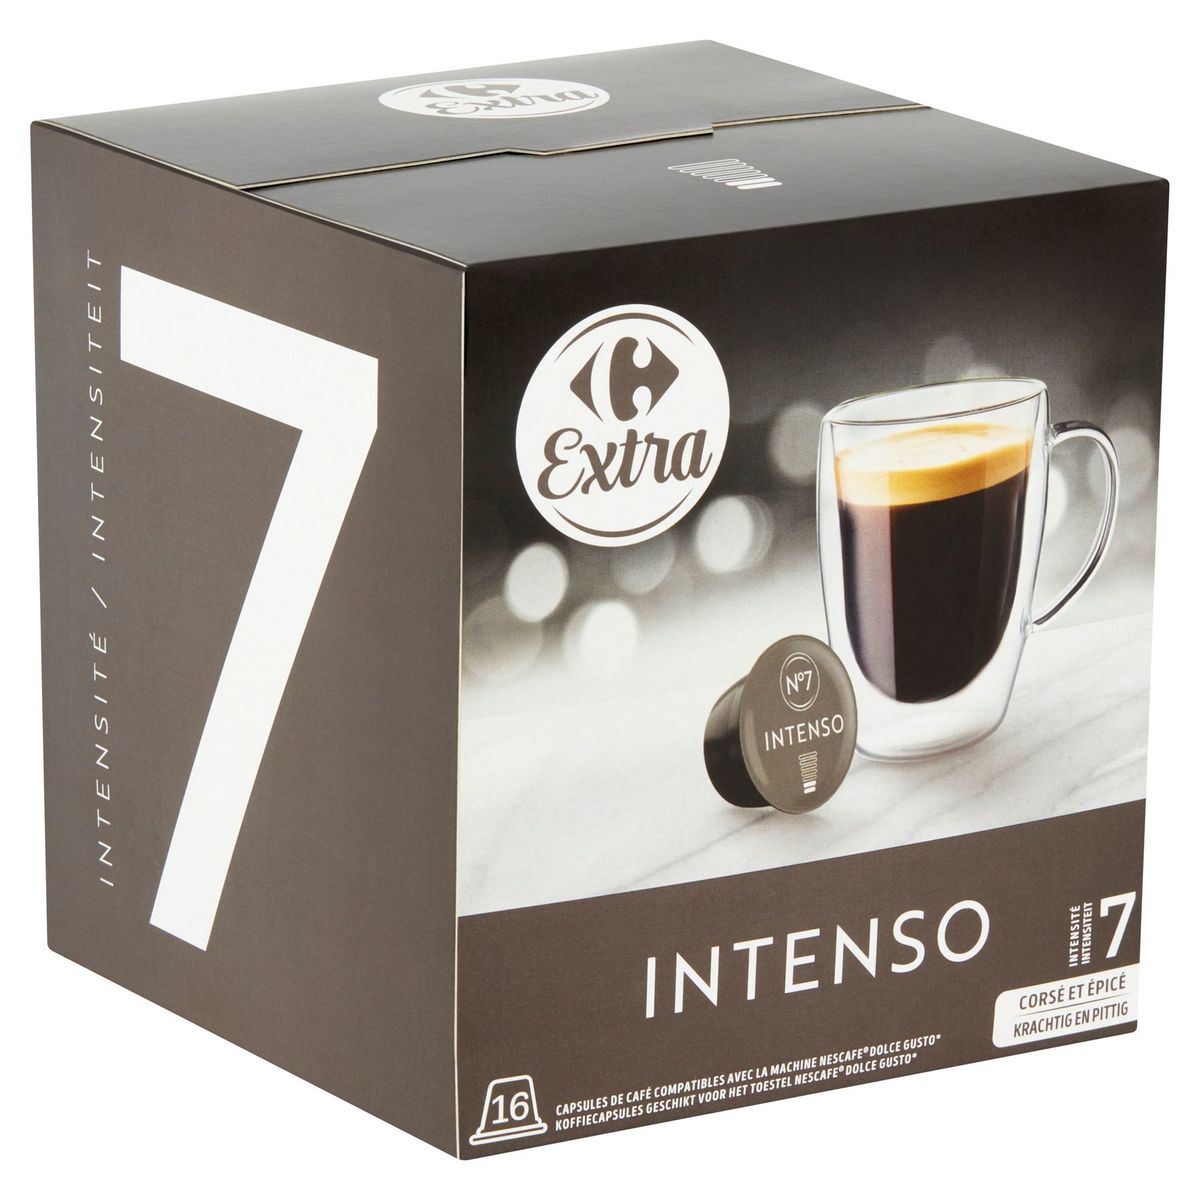 Carrefour Extra Intenso 16 x 7.5 g